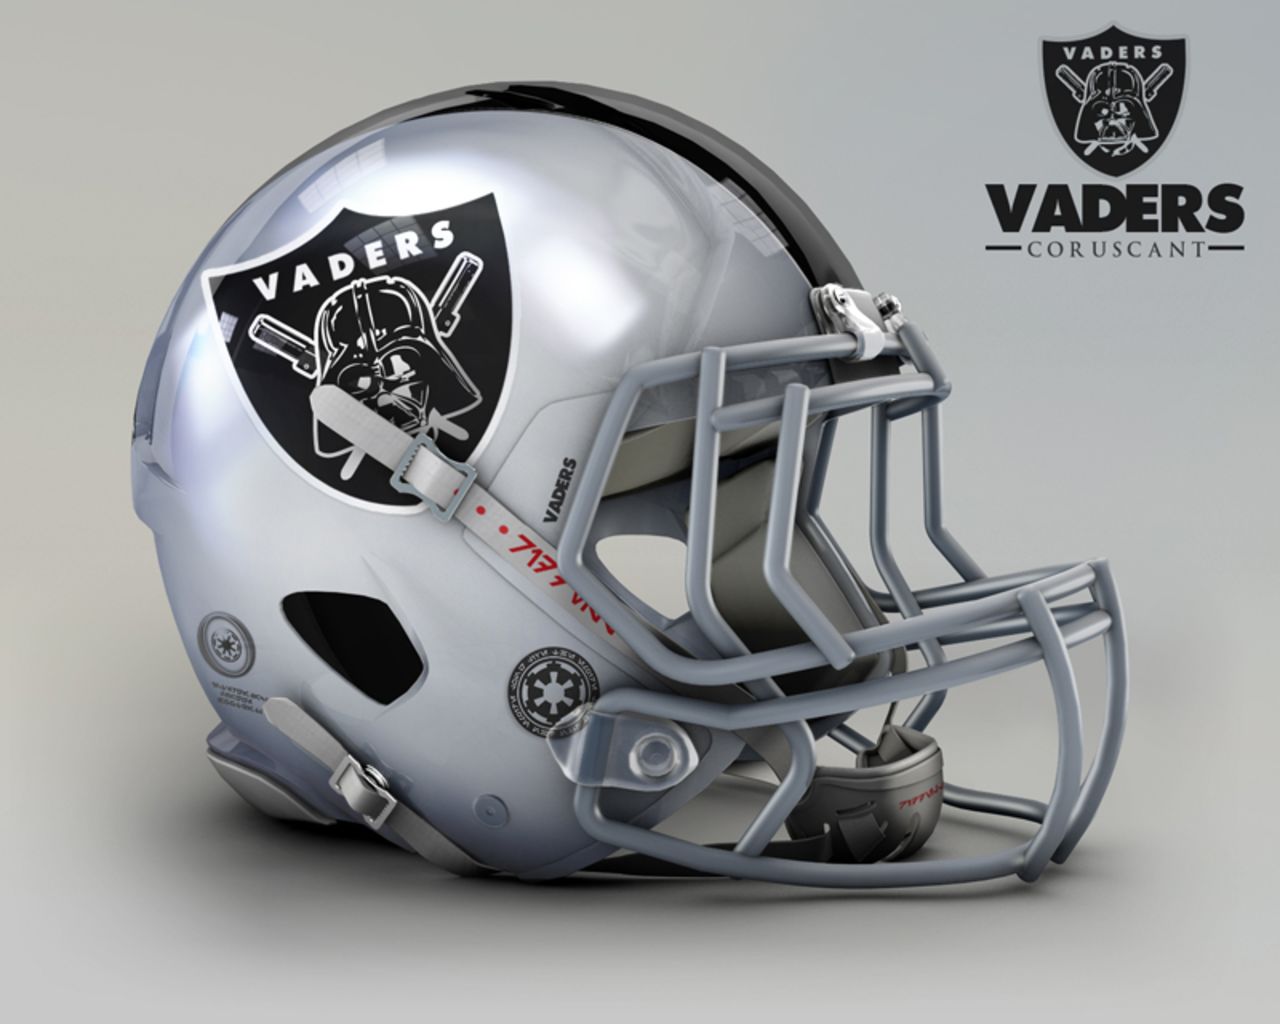 What if NFL teams relocated to a galaxy far, far away? Would the Raiders become the Vaders? This galactic mashup - where NFL teams meet characters from the Star Wars universe - comes courtesy of Mexican designer <a href="https://www.behance.net/johnraya" target="_blank" target="_blank">John Raya</a>, who found a way to mix up his two greatest passions. The idea started with his favorite team, the <a href="http://www.raiders.com/" target="_blank" target="_blank">Oakland Raiders</a>, who experienced a very smooth transition to the Dark Side, becoming the Coruscant Vaders (if you're not a Star Wars geek, Coruscant is the home planet of Anakin Skywalker, who later becomes Darth Vader).